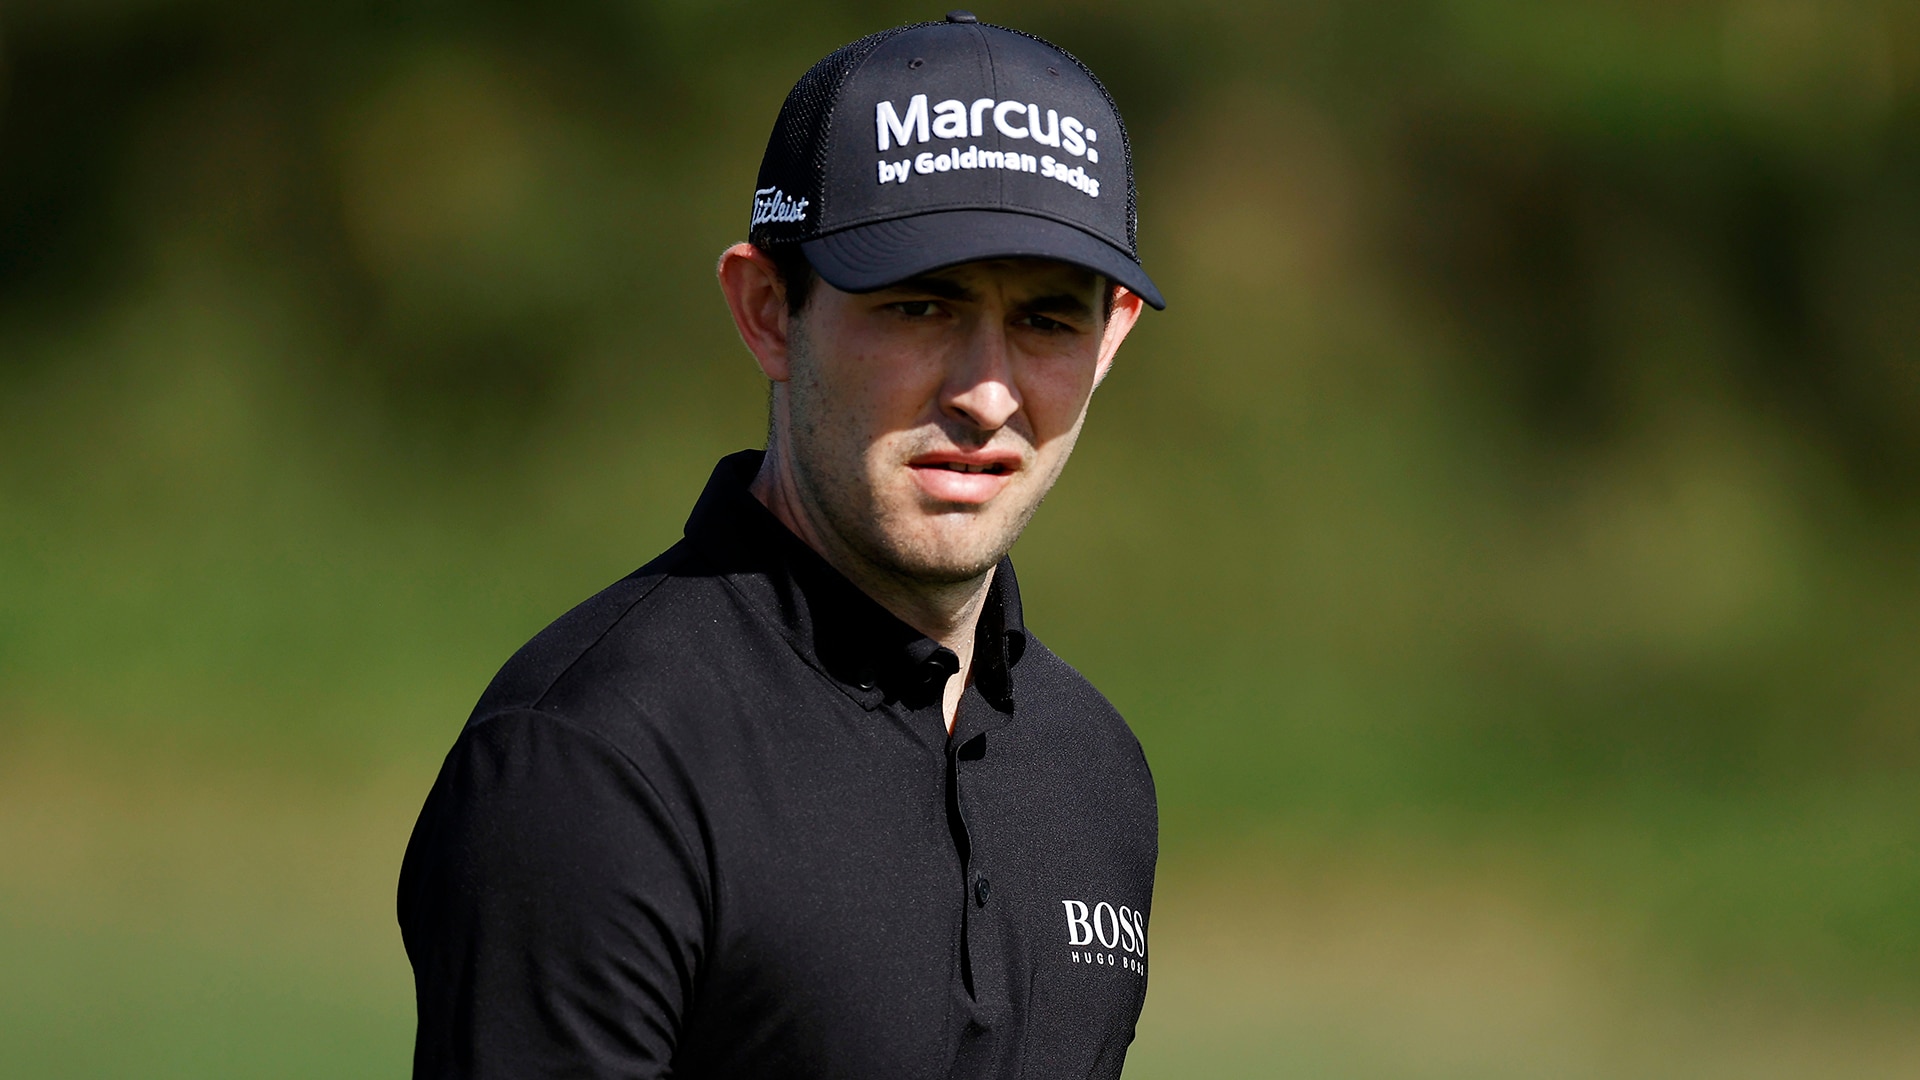 American Express odds: Patrick Cantlay replaces Jon Rahm (WD) as favorite